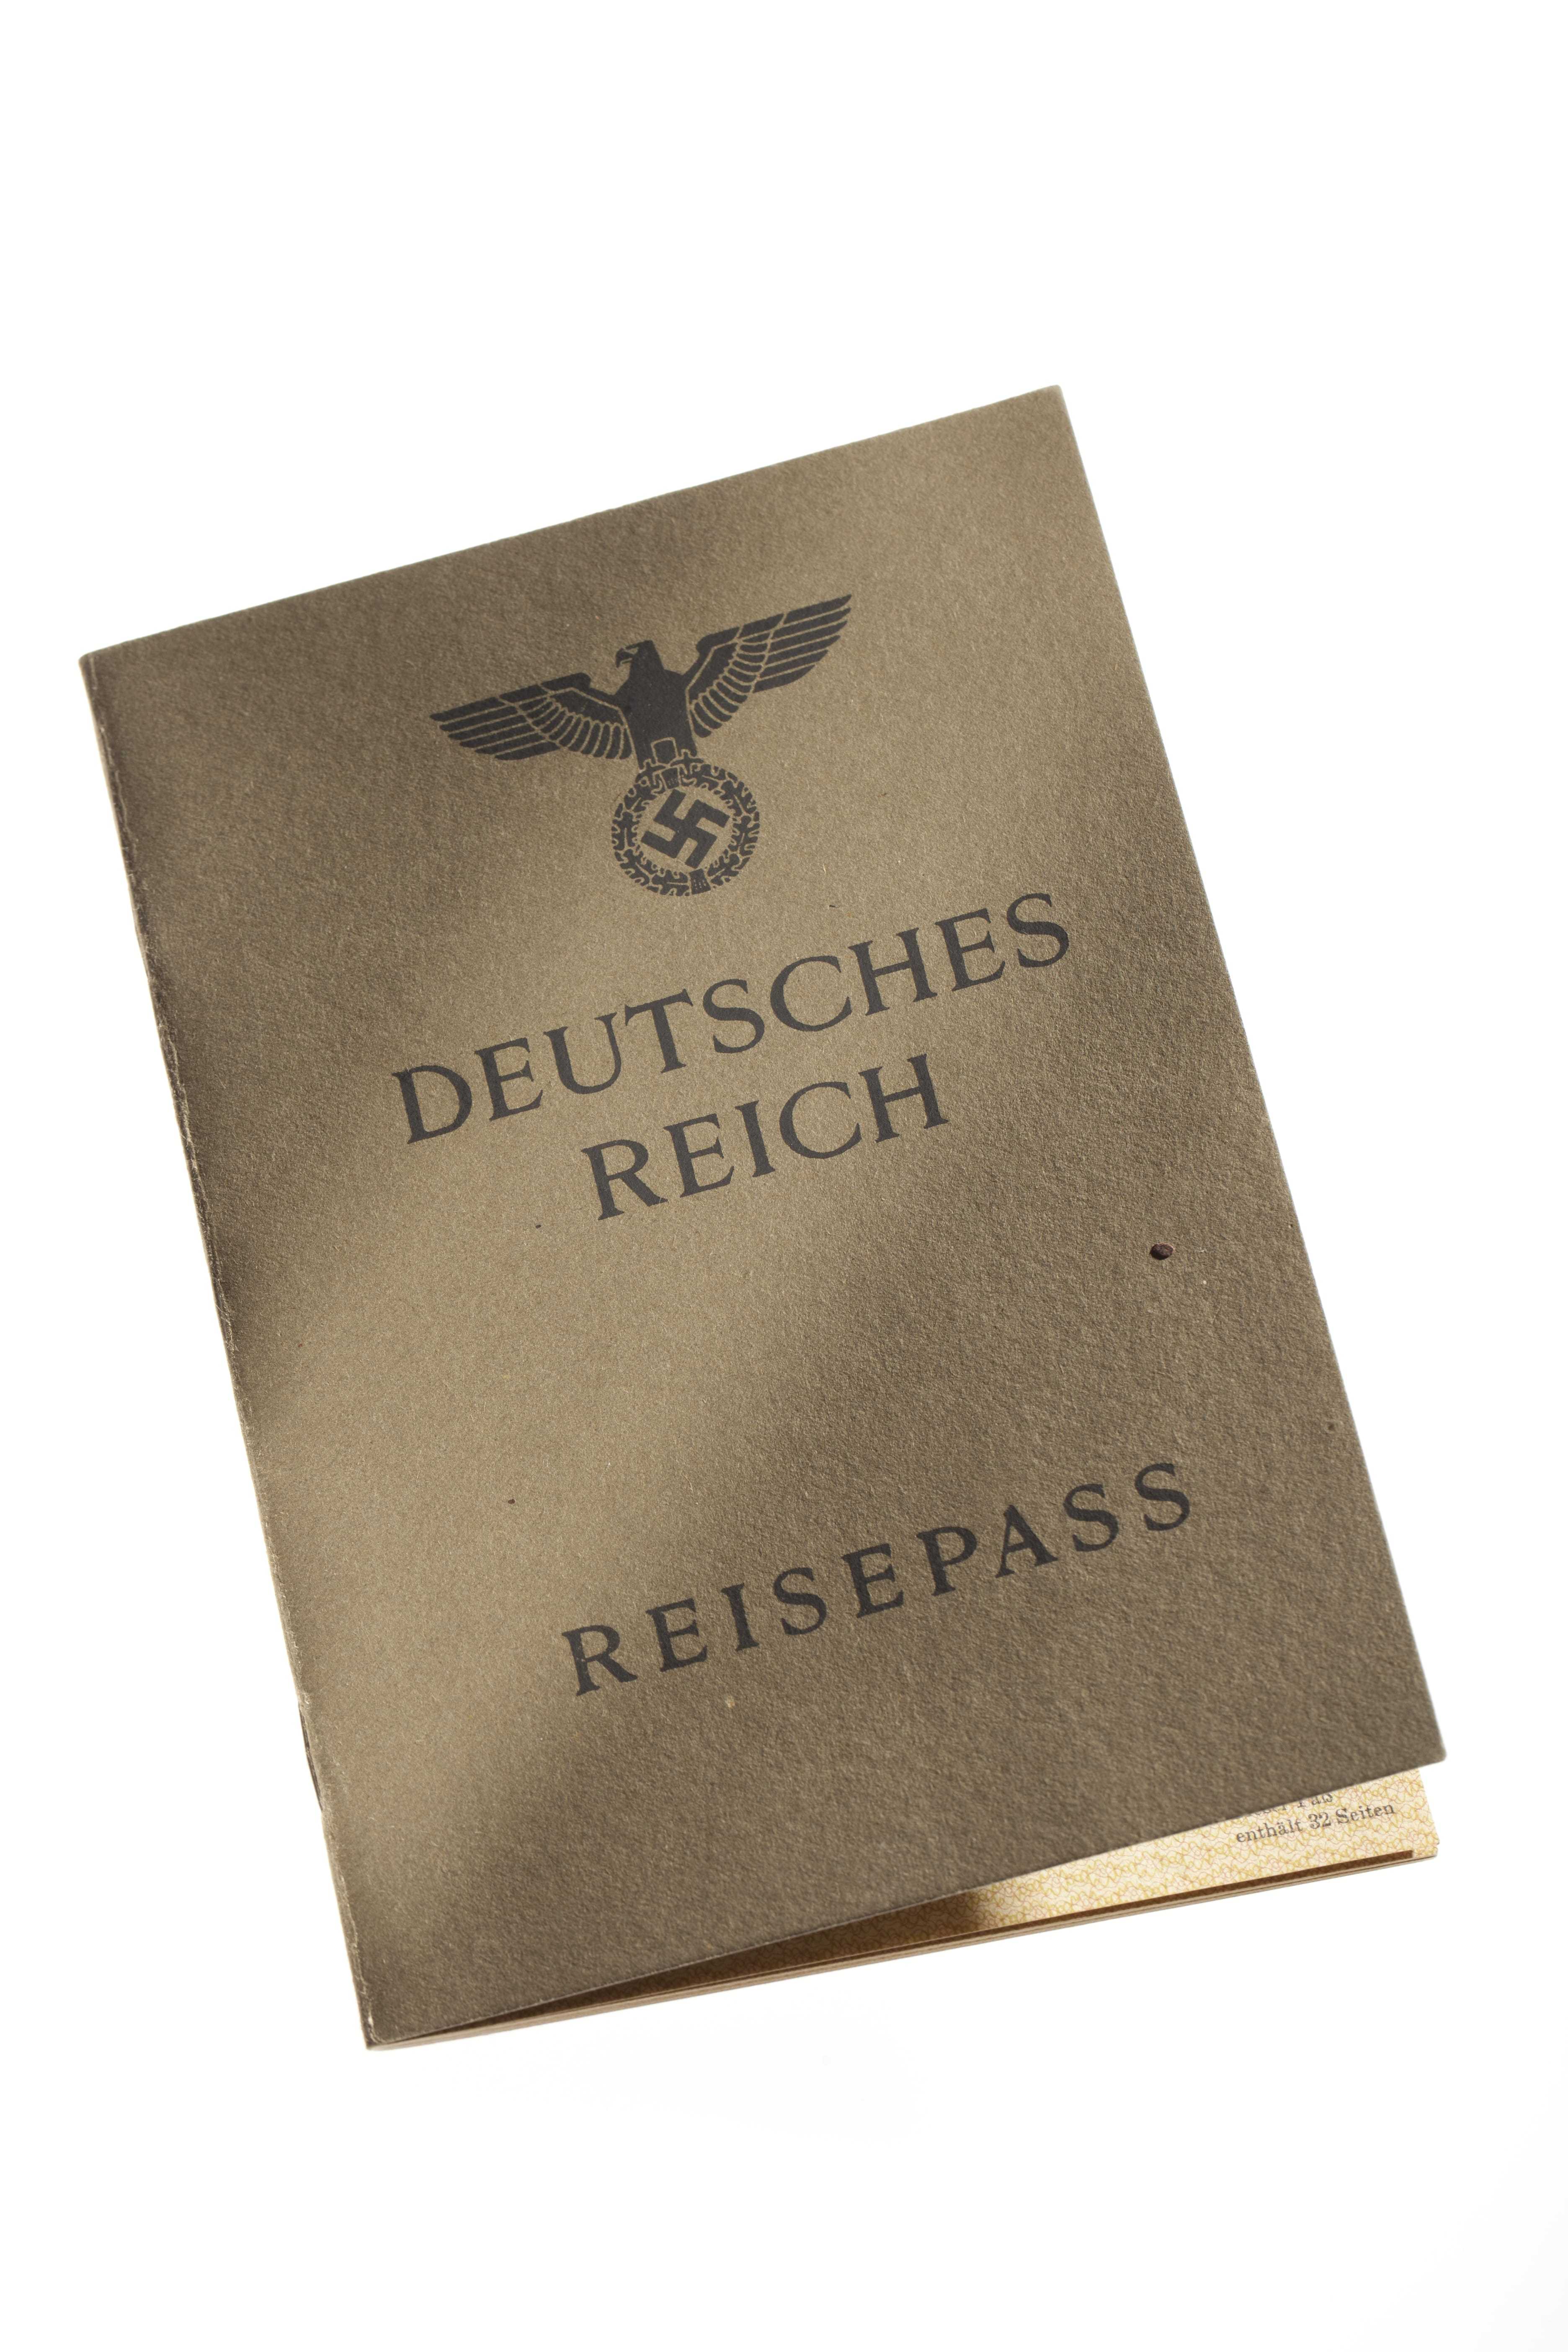 The cover of a forged German passport with the Nazi emblem and German text.